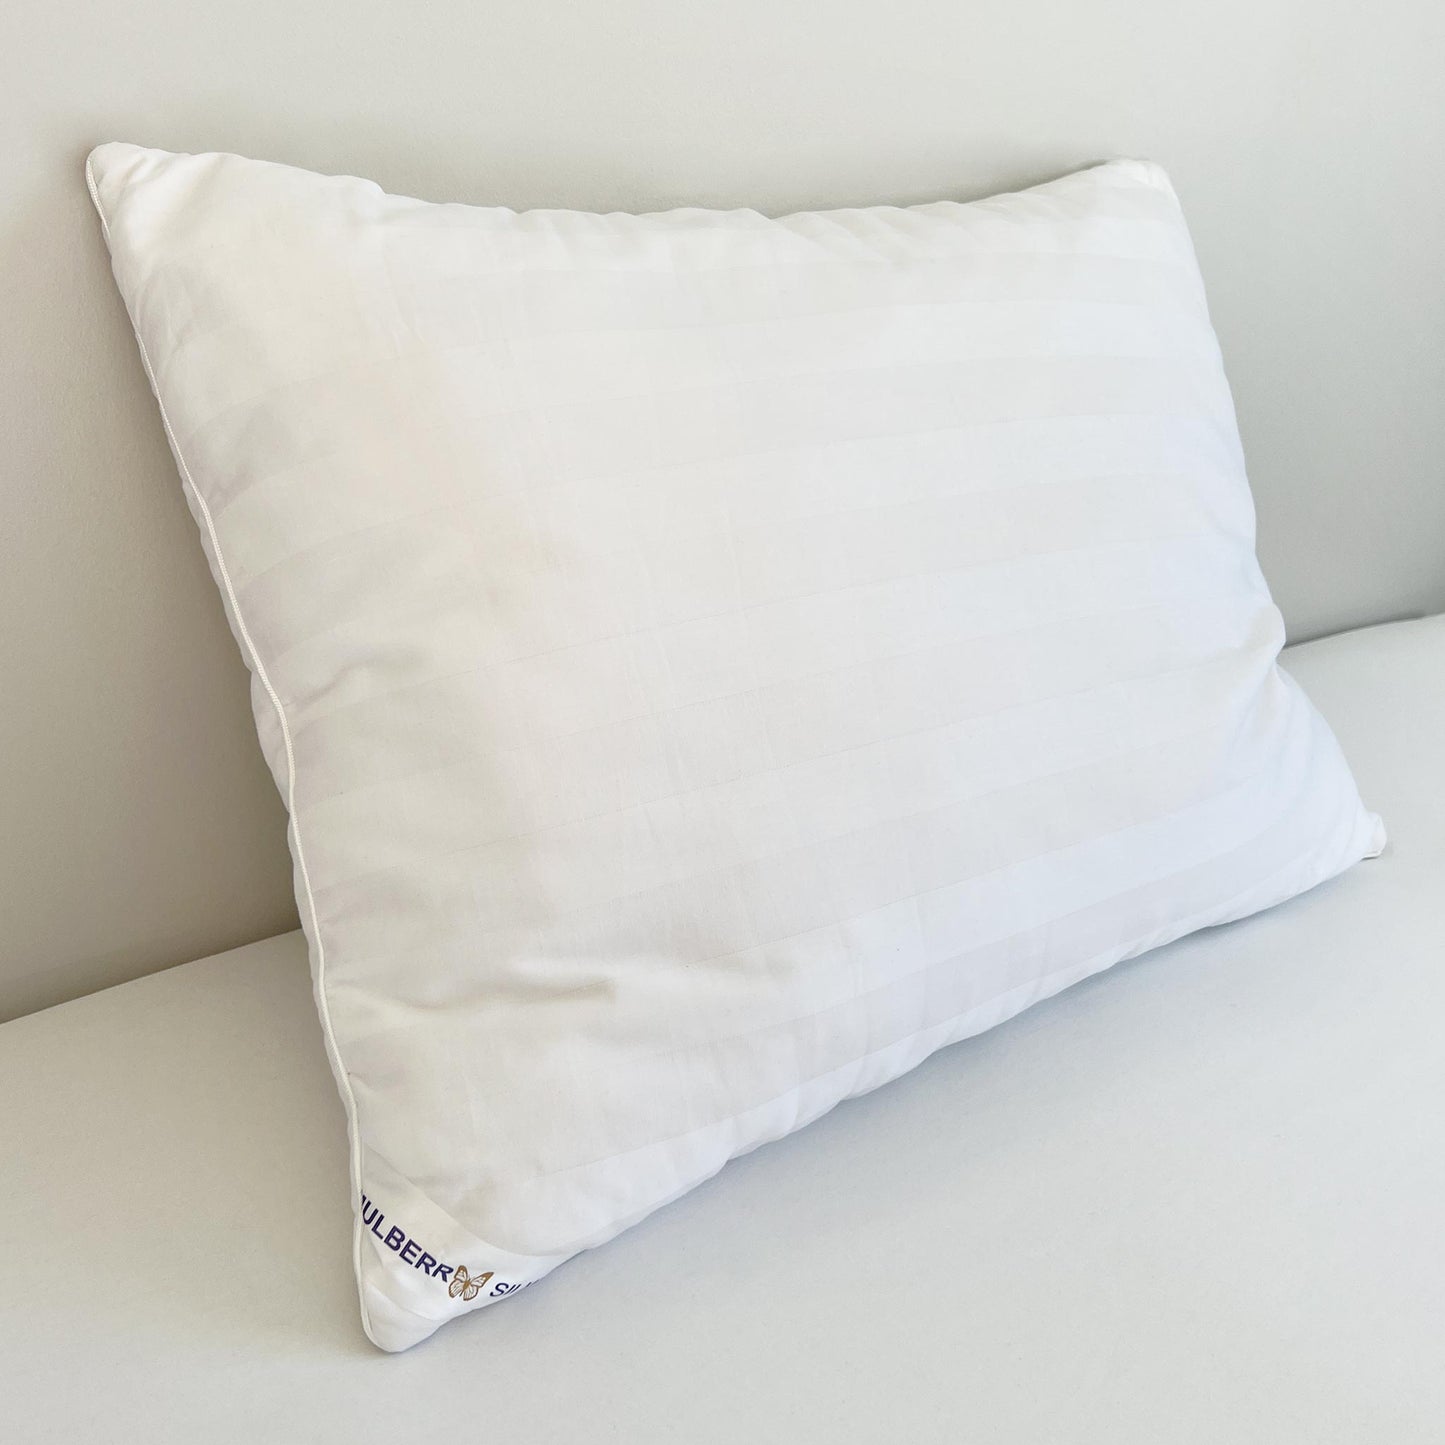 Mulberry Silk Perfect Pillow - Buy One Get One Free Special Offer